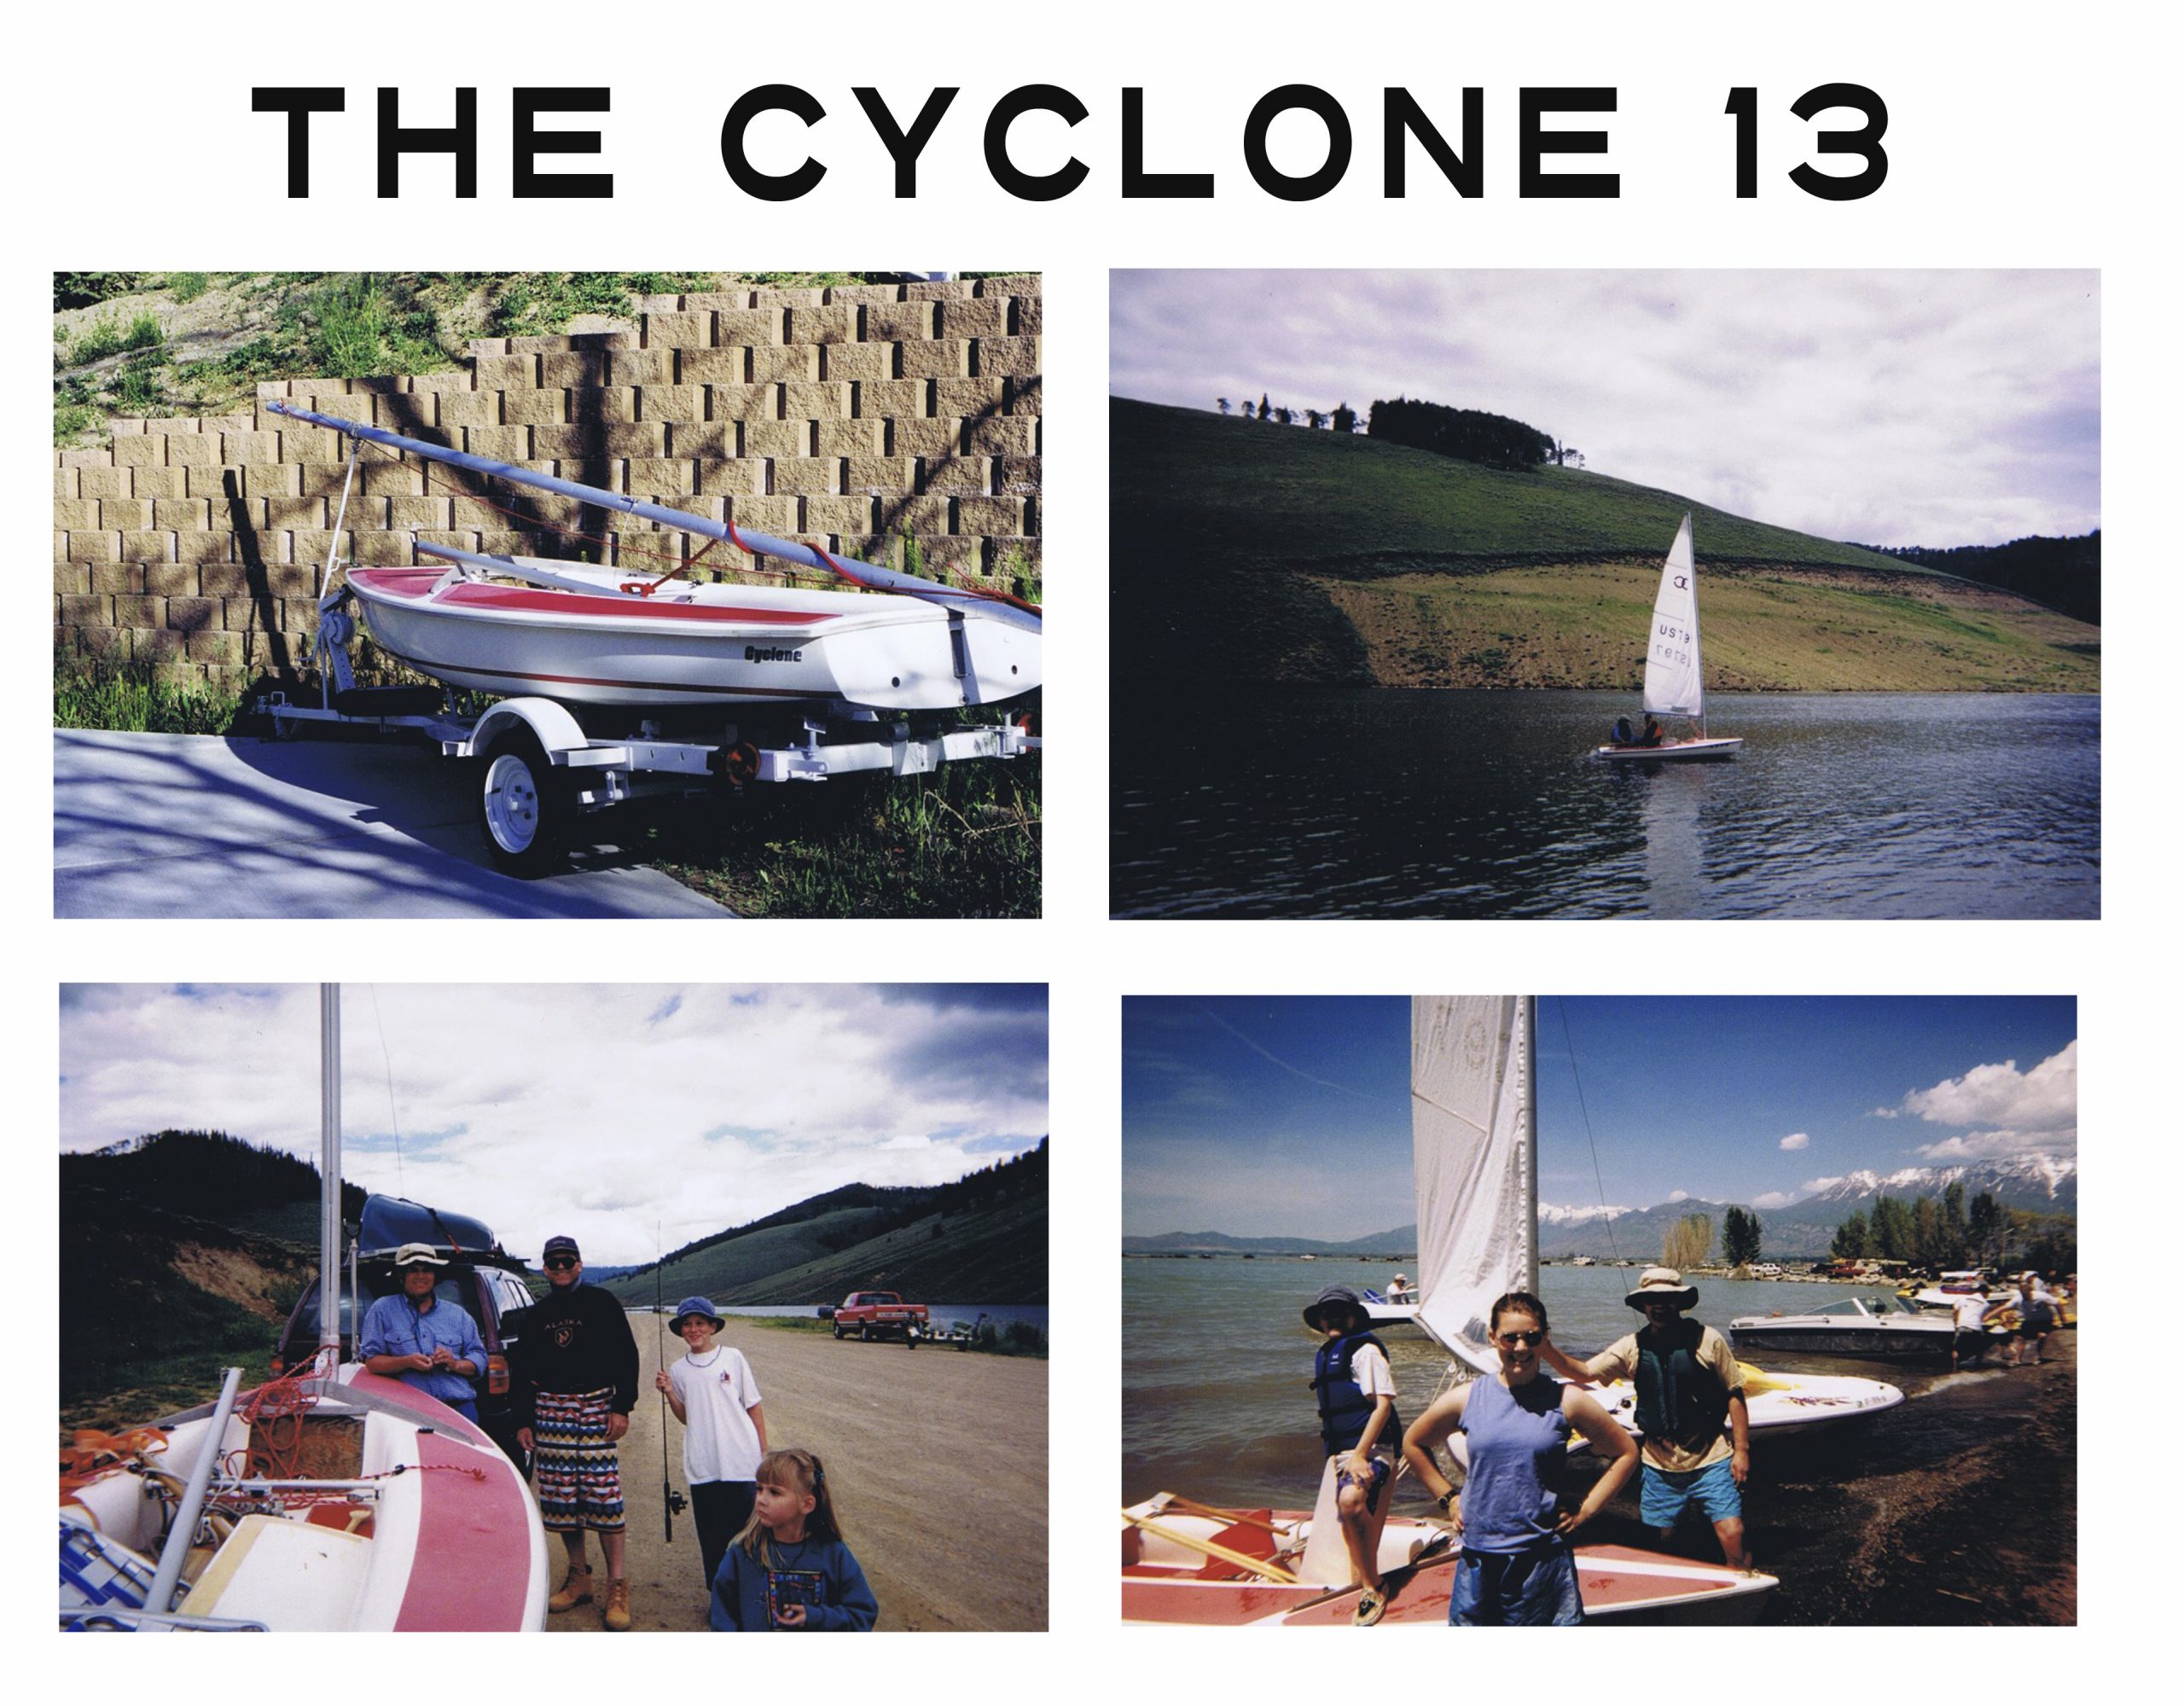 The Cyclone 13